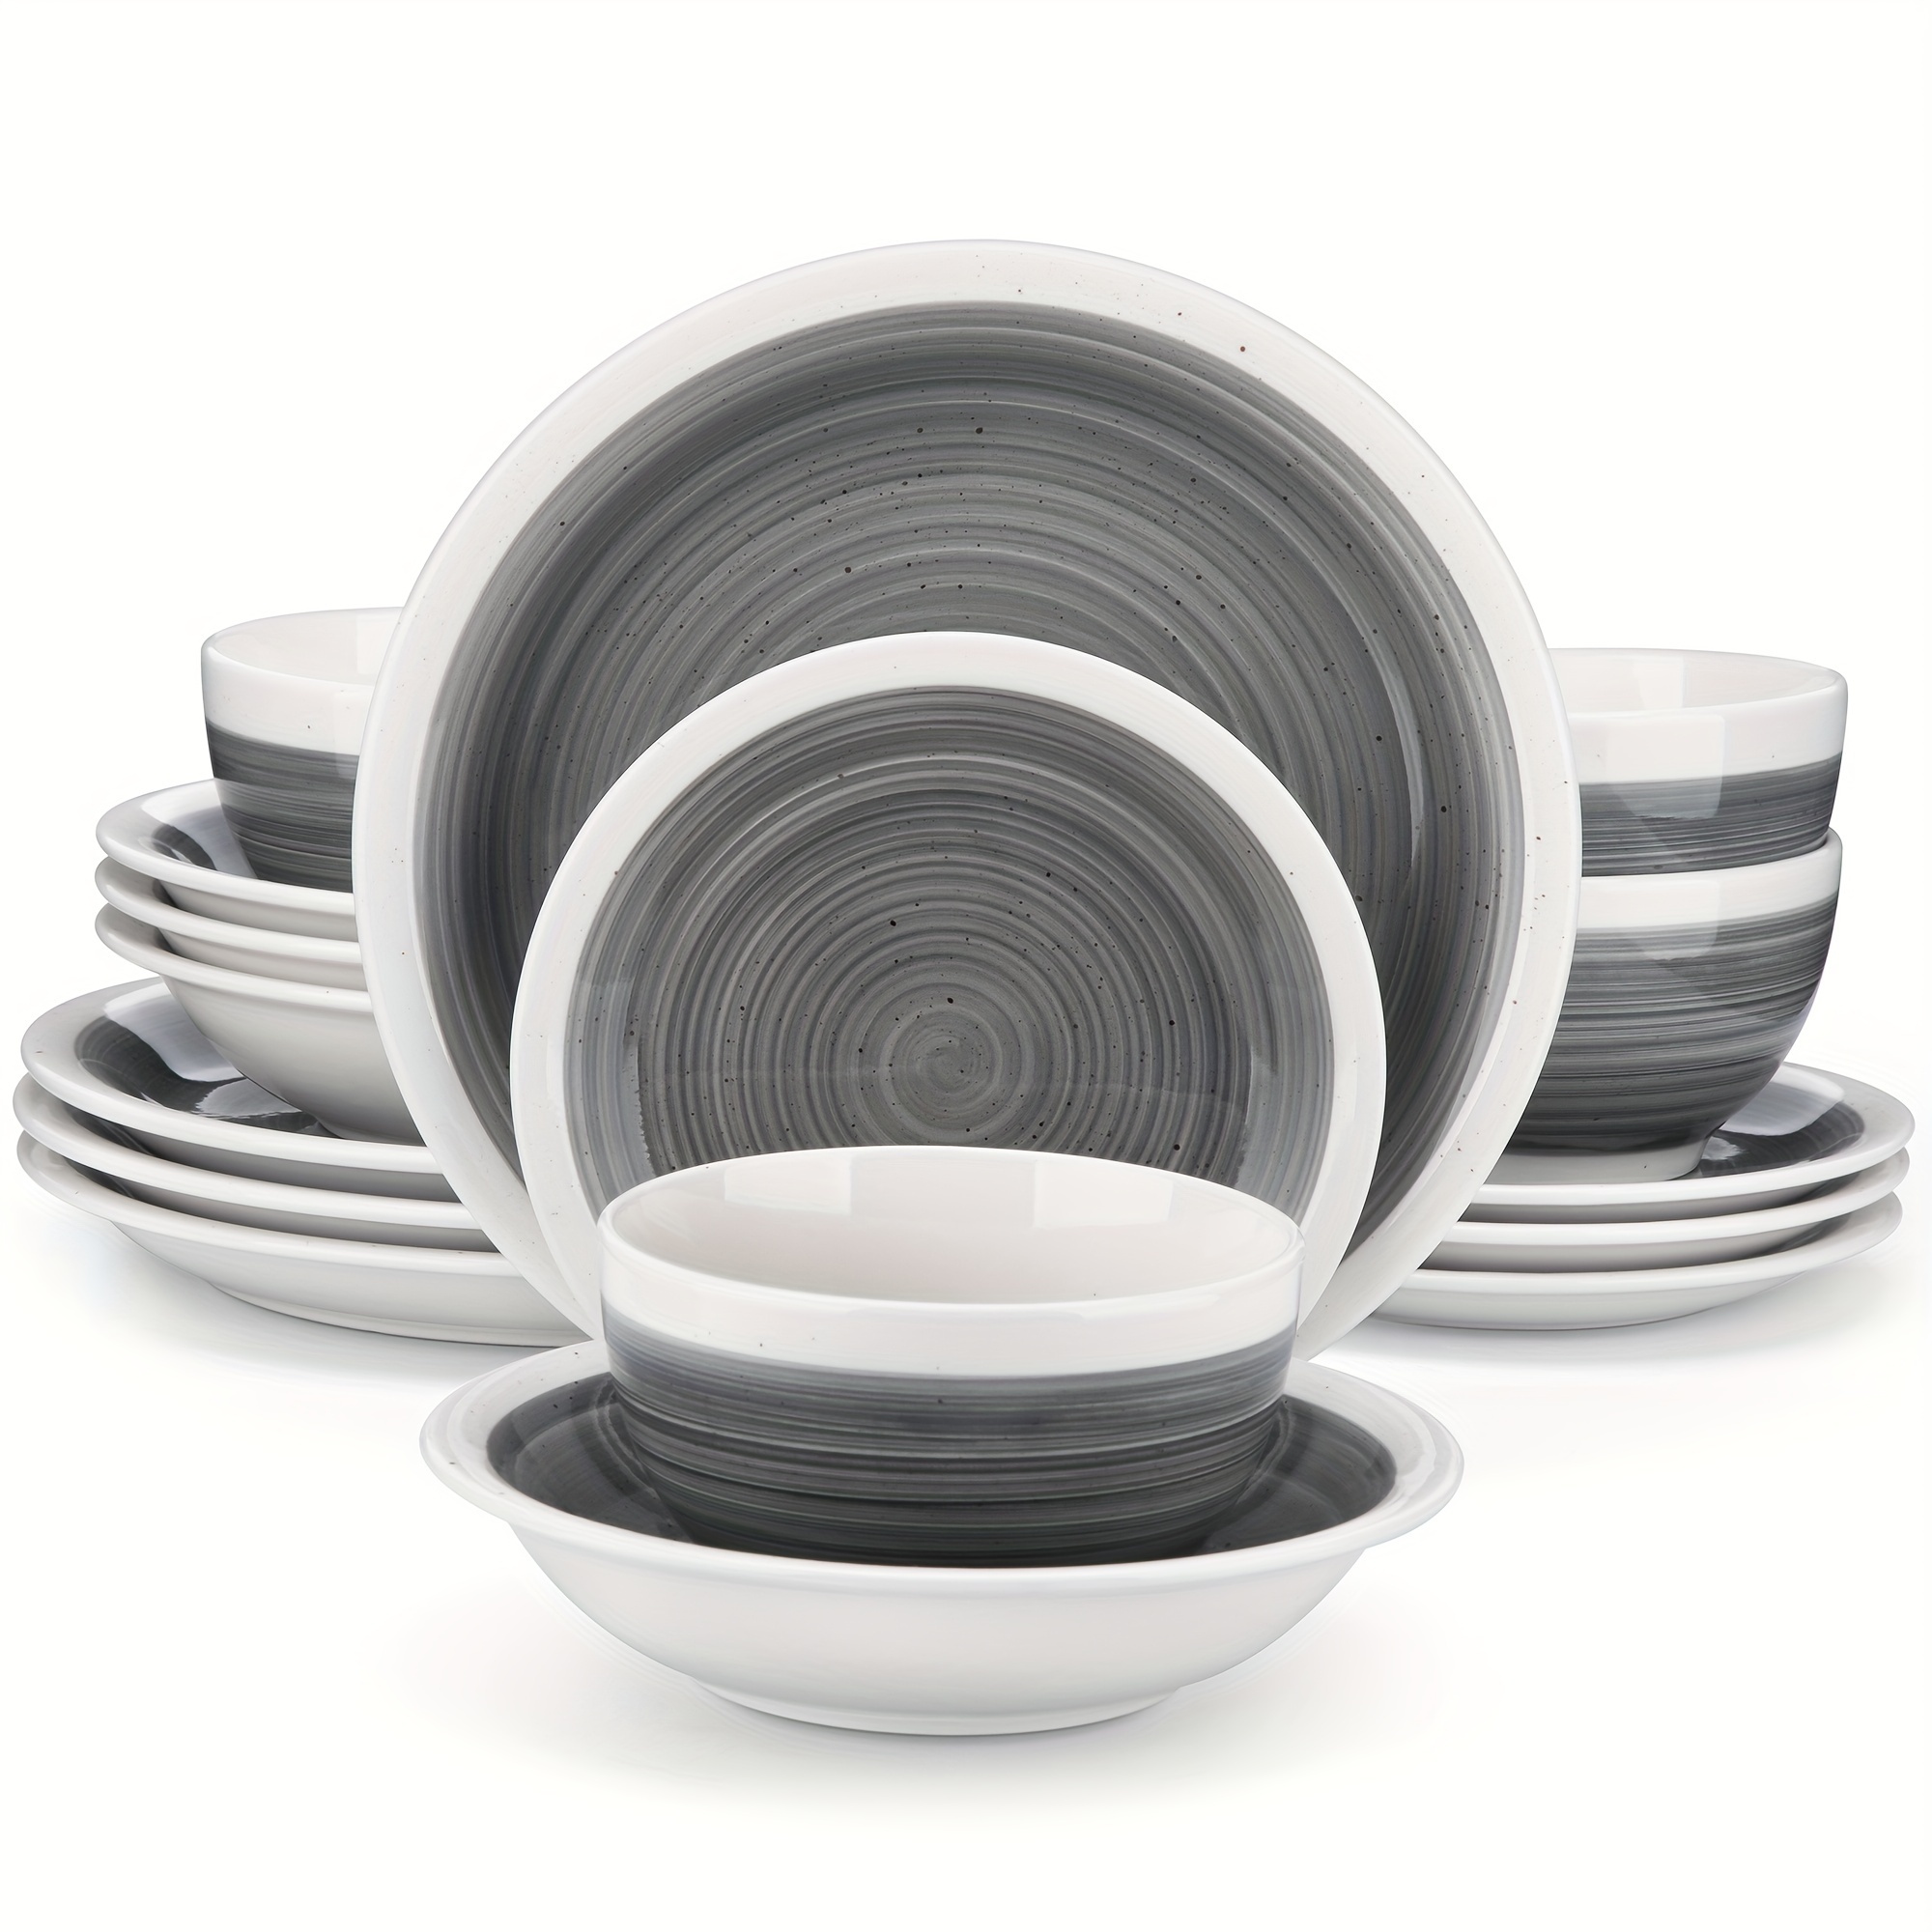 

16pcs Dinnerware Set, Gray Tableware, Porcelain Dining Set, Reusable And Washable Plate Bowl , For Home Kitchen, Restaurant, Party And Holiday, Kitchen Organizers And Storage, Kitchen Accessories